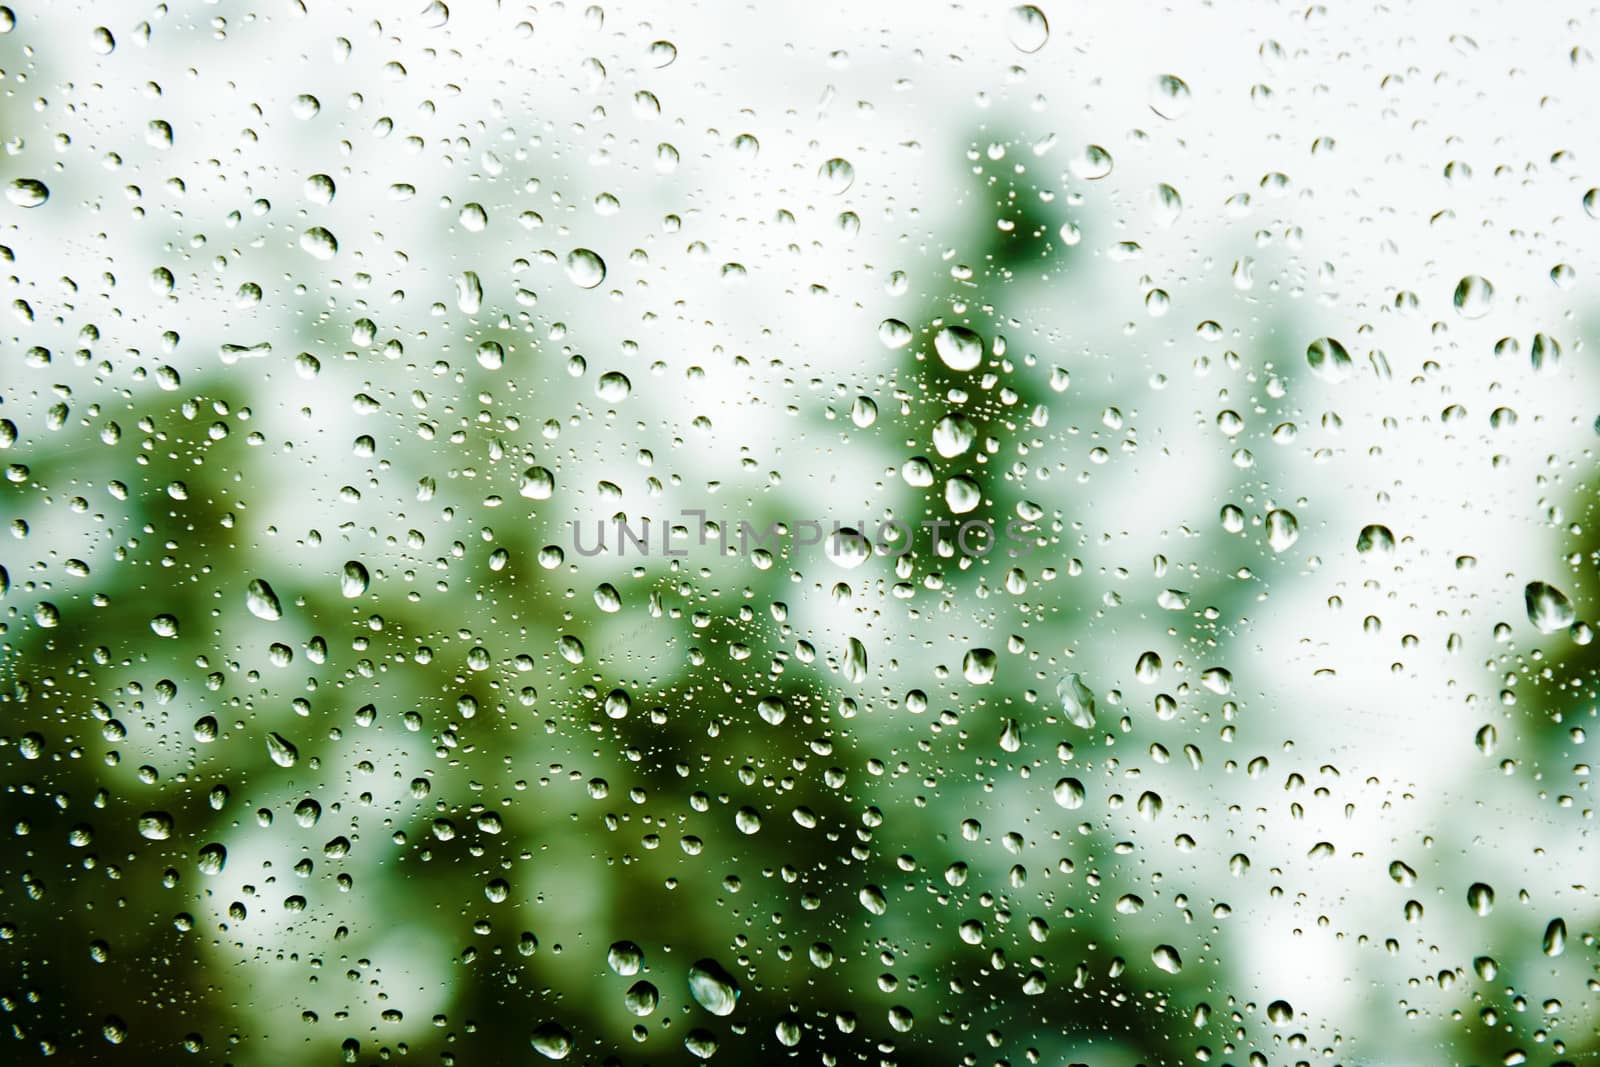 Drops of rain on glass on background of trees